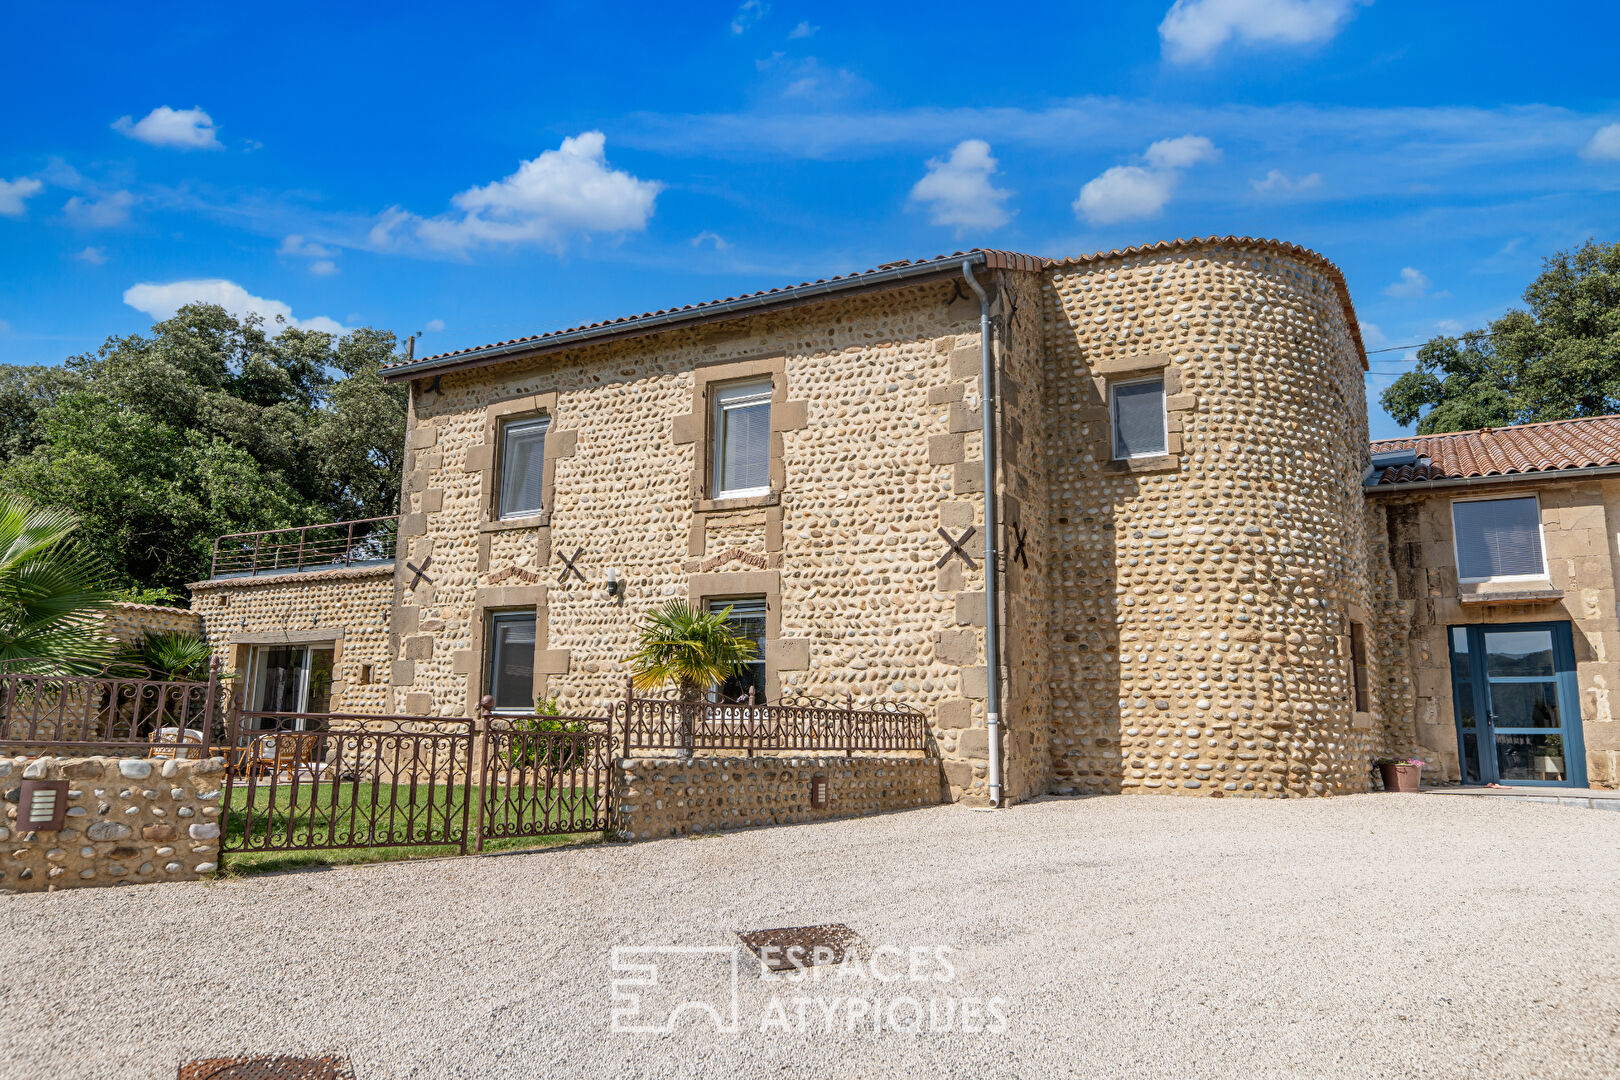 Completely renovated stone house